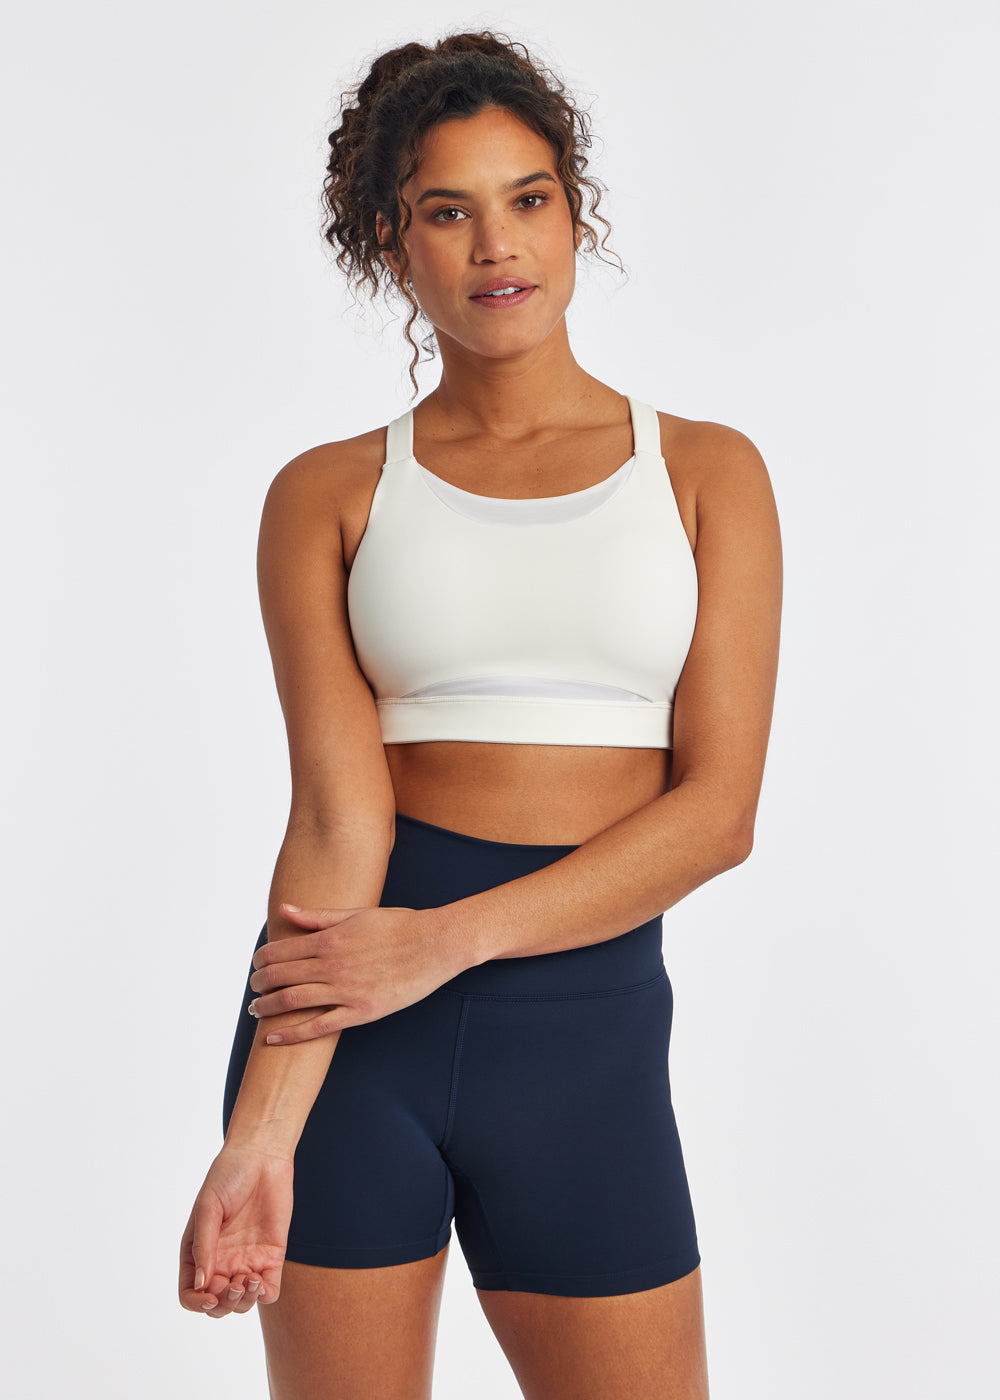 Lululemon All Powered Up Bra 34D Blue Size M - $34 New With